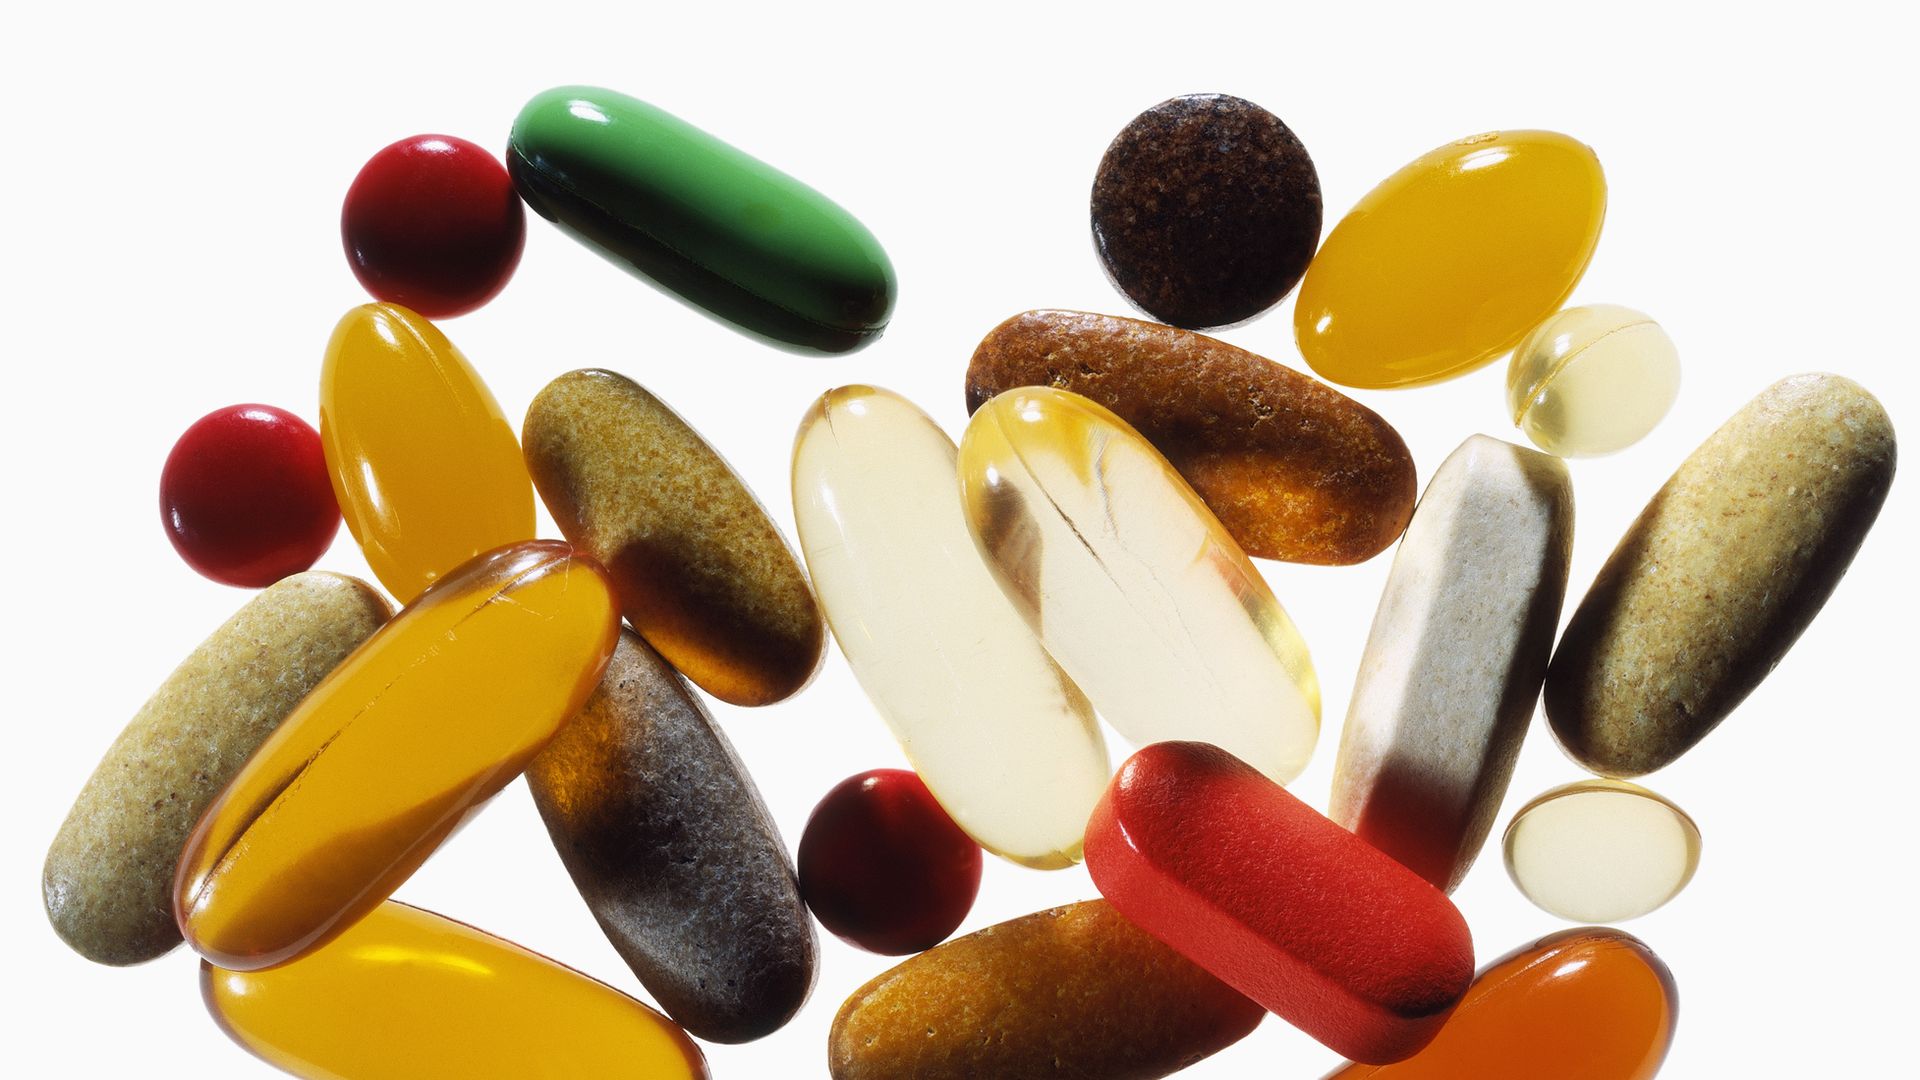 Pill, Capsule, Pharmaceutical drug, Medicine, Dietary supplement, Jelly bean, Food, Nutraceutical, Service, Colorfulness, 